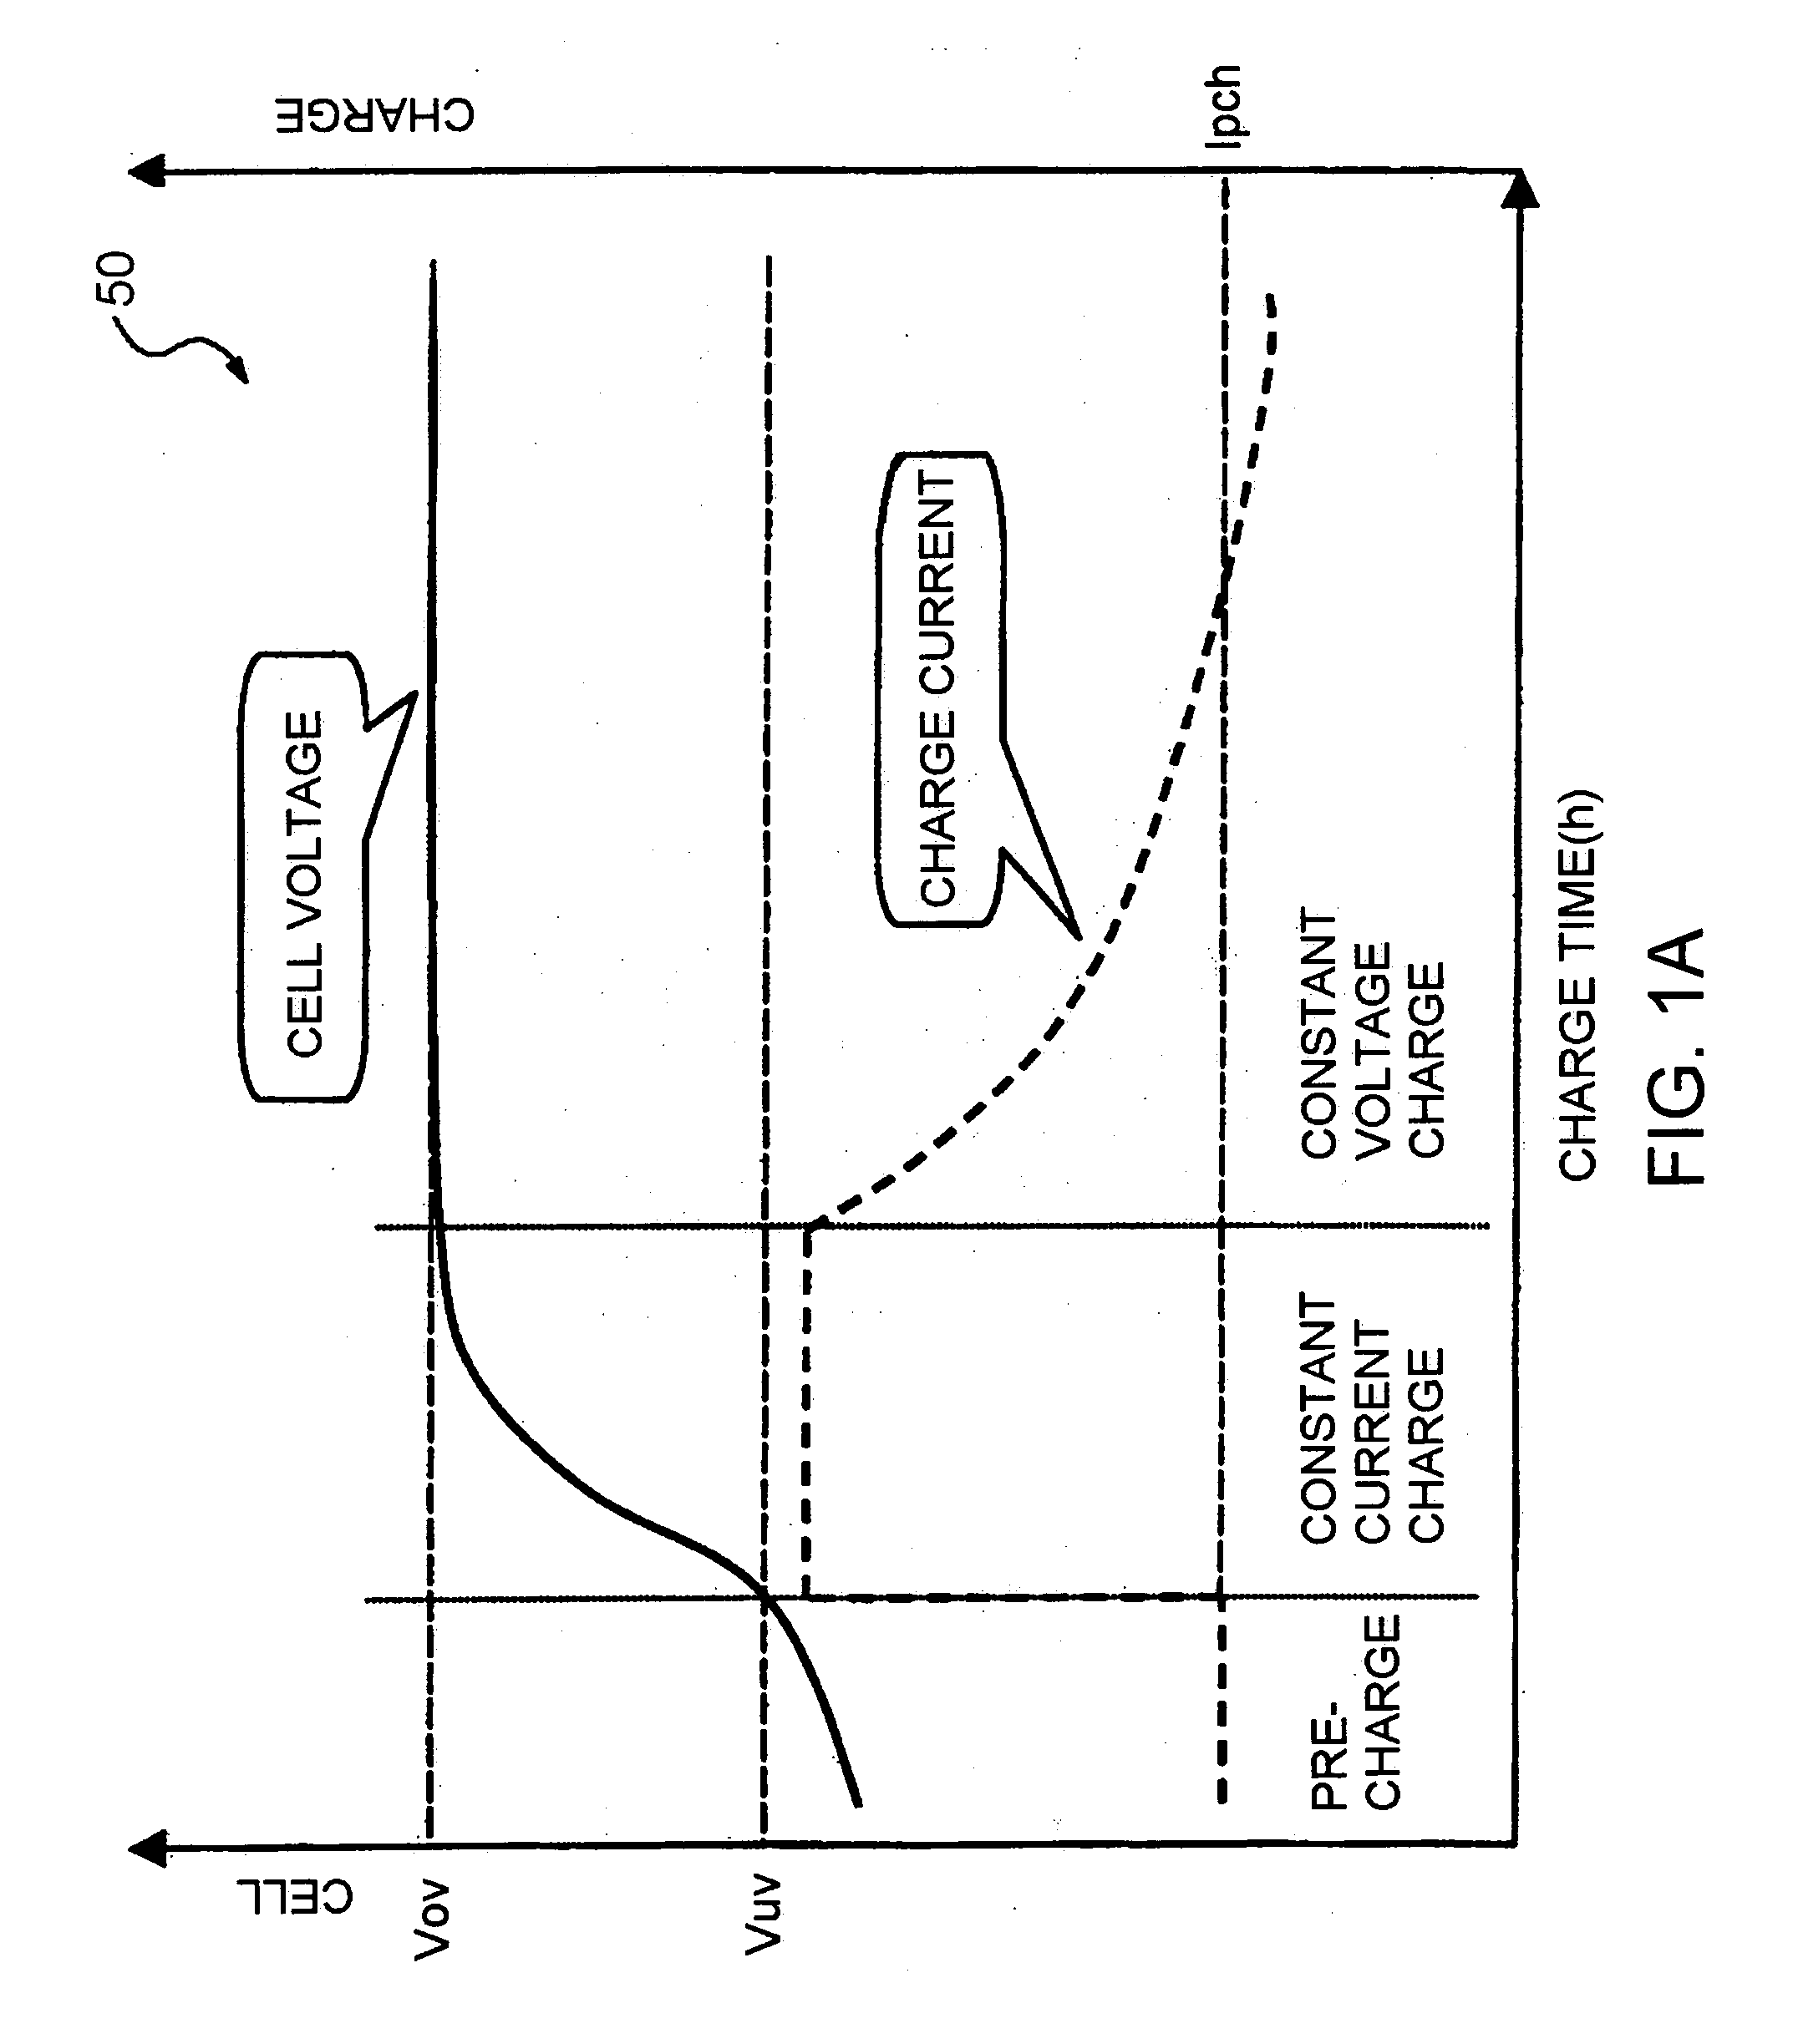 Circuits capable of trickle precharge and/or trickle discharge